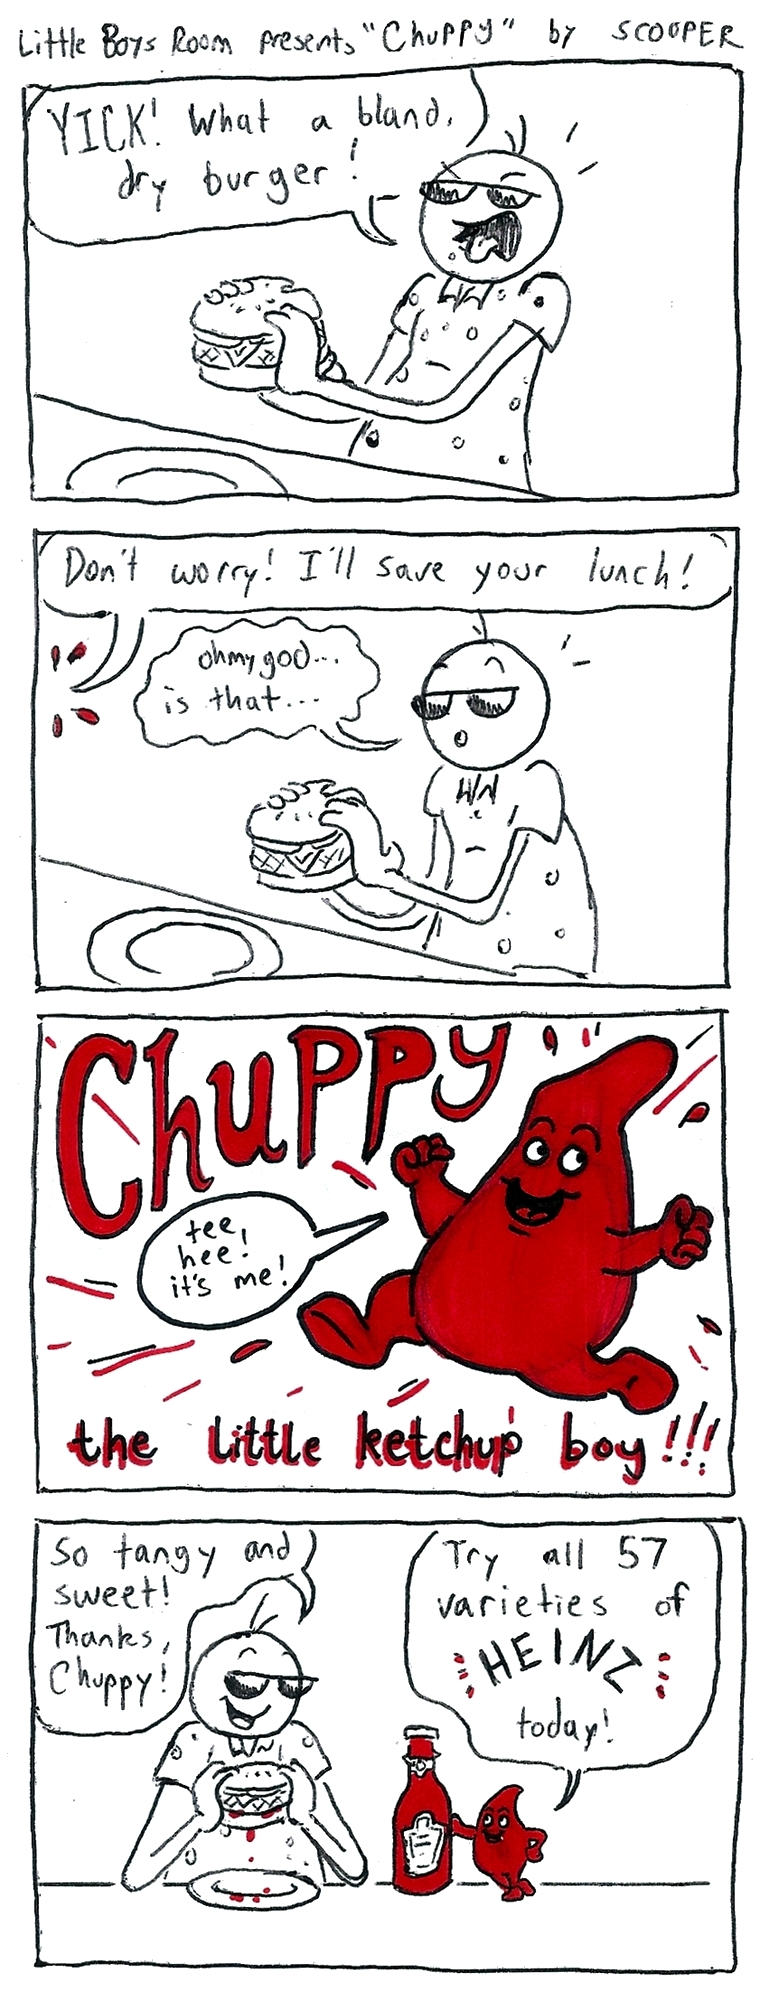 chuppy created by sarah shockey & inspired by the good honest ketchup made by the Heinz company